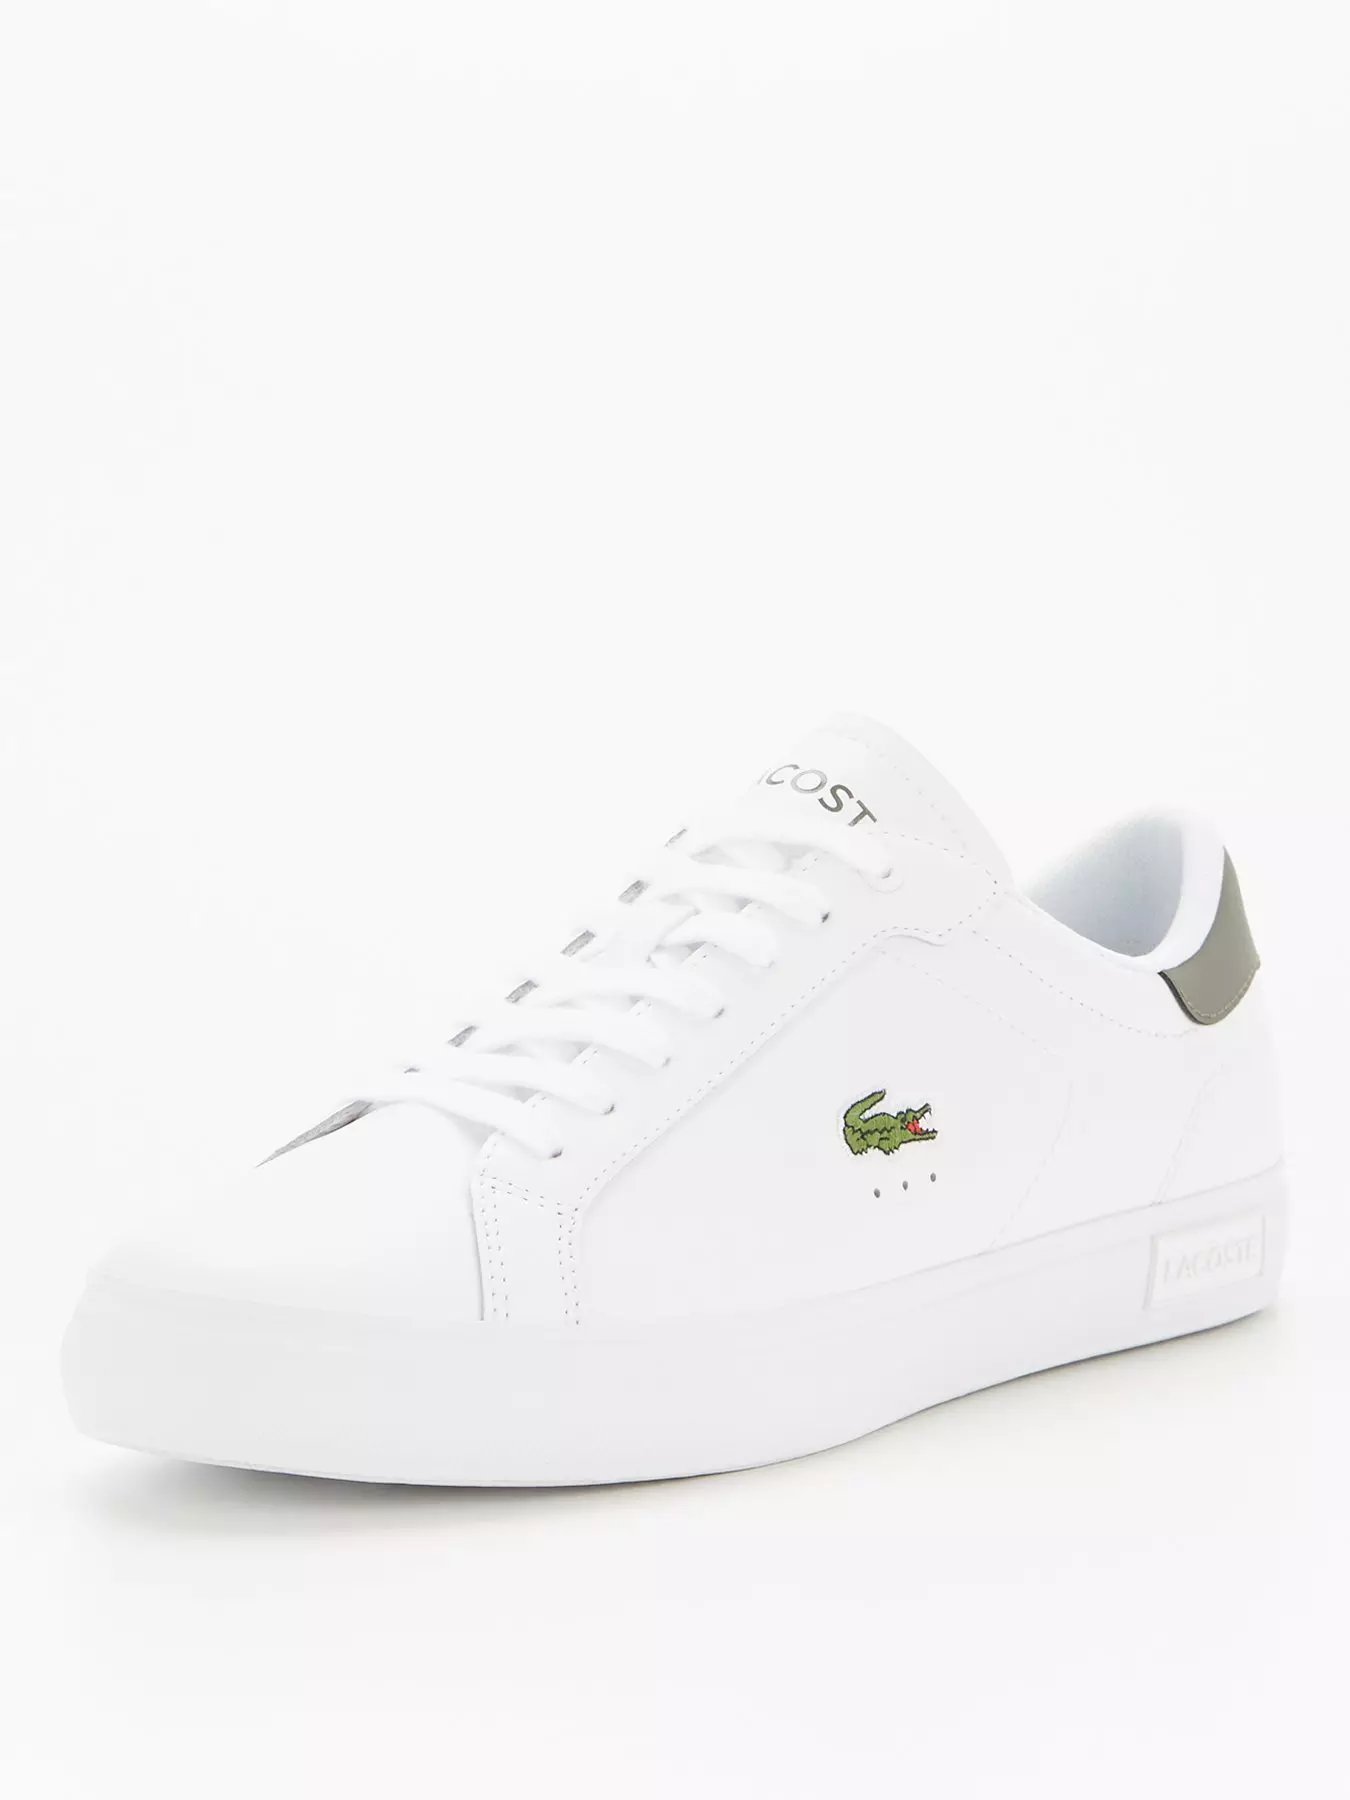 Lacoste Trainers Lacoste Pumps Mens Very Co Uk